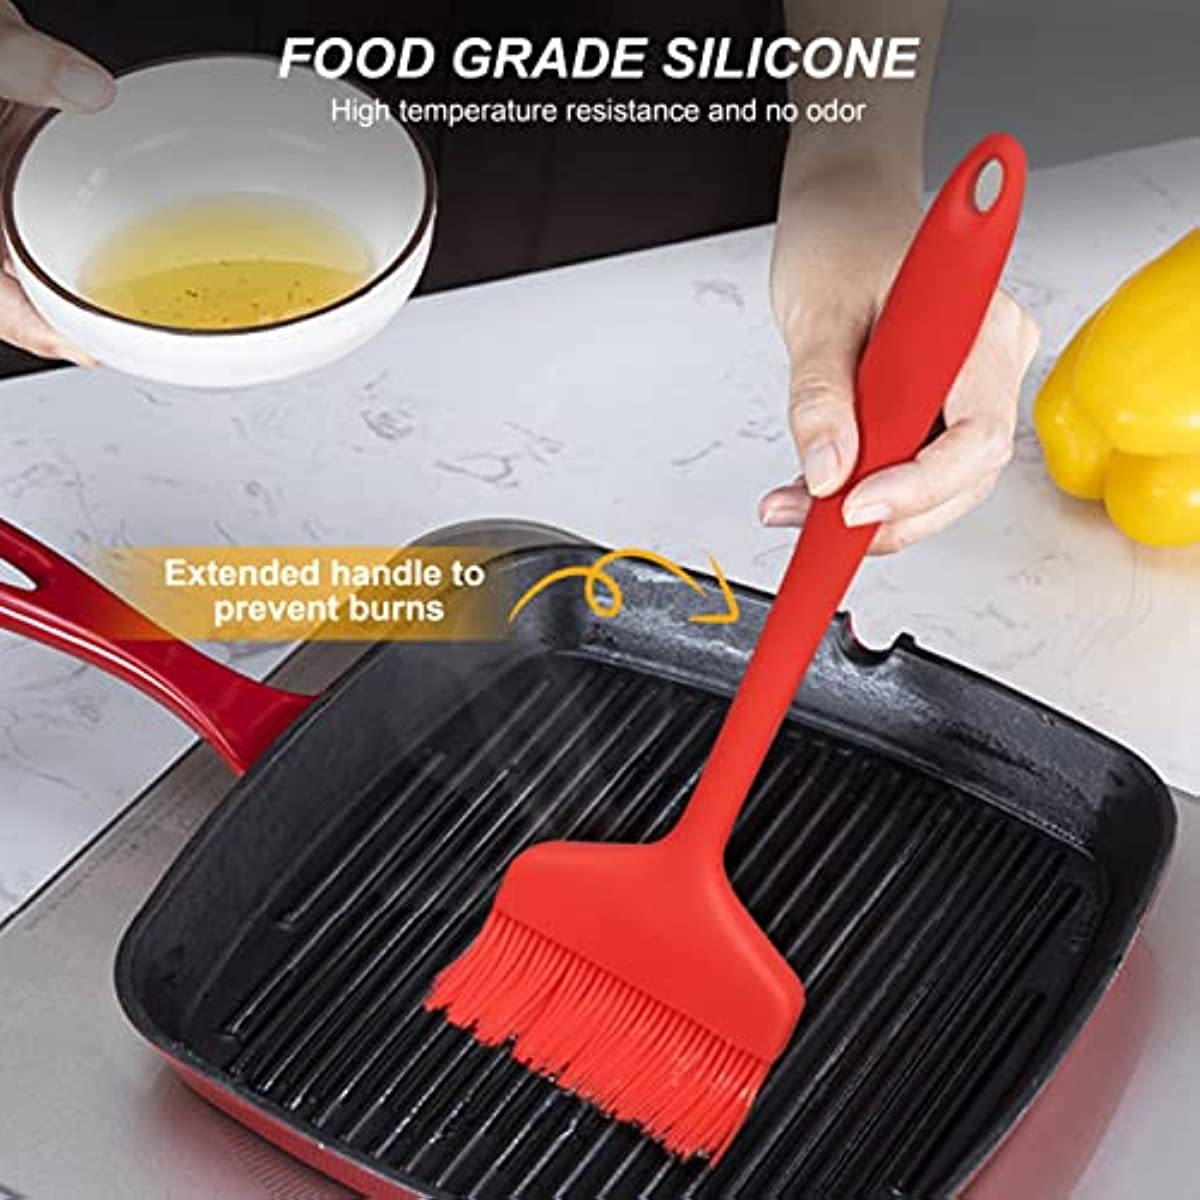 1PC Silicone Baking Tray Pastry Butter Brush Barbecue Brush DIY Kitchen  Outdoor BBQ Baking Cooking Tool Kitchen Accessories